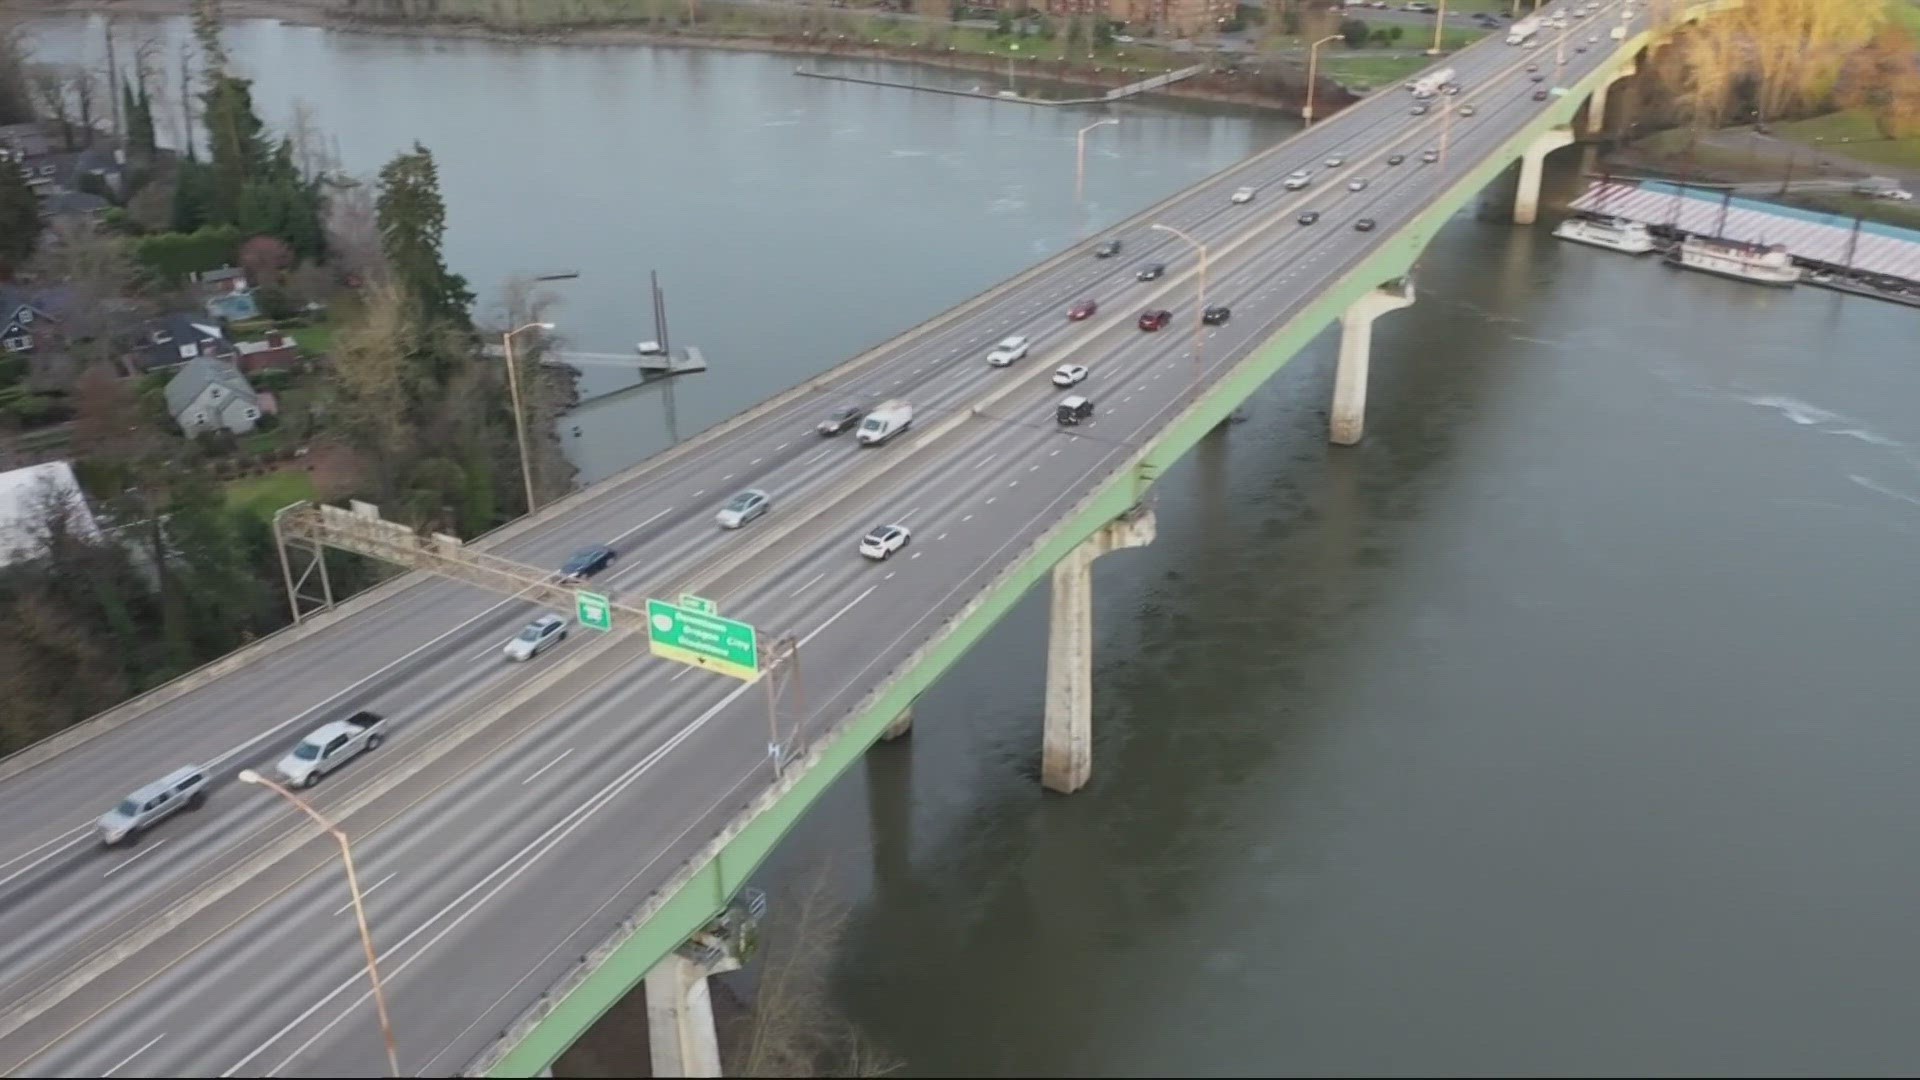 West Linn Mayor Rory Bialostosky said that the state needs to embrace public opposition to the I-205 and I-5 tolls. He thinks they’re trying to avoid pushback.